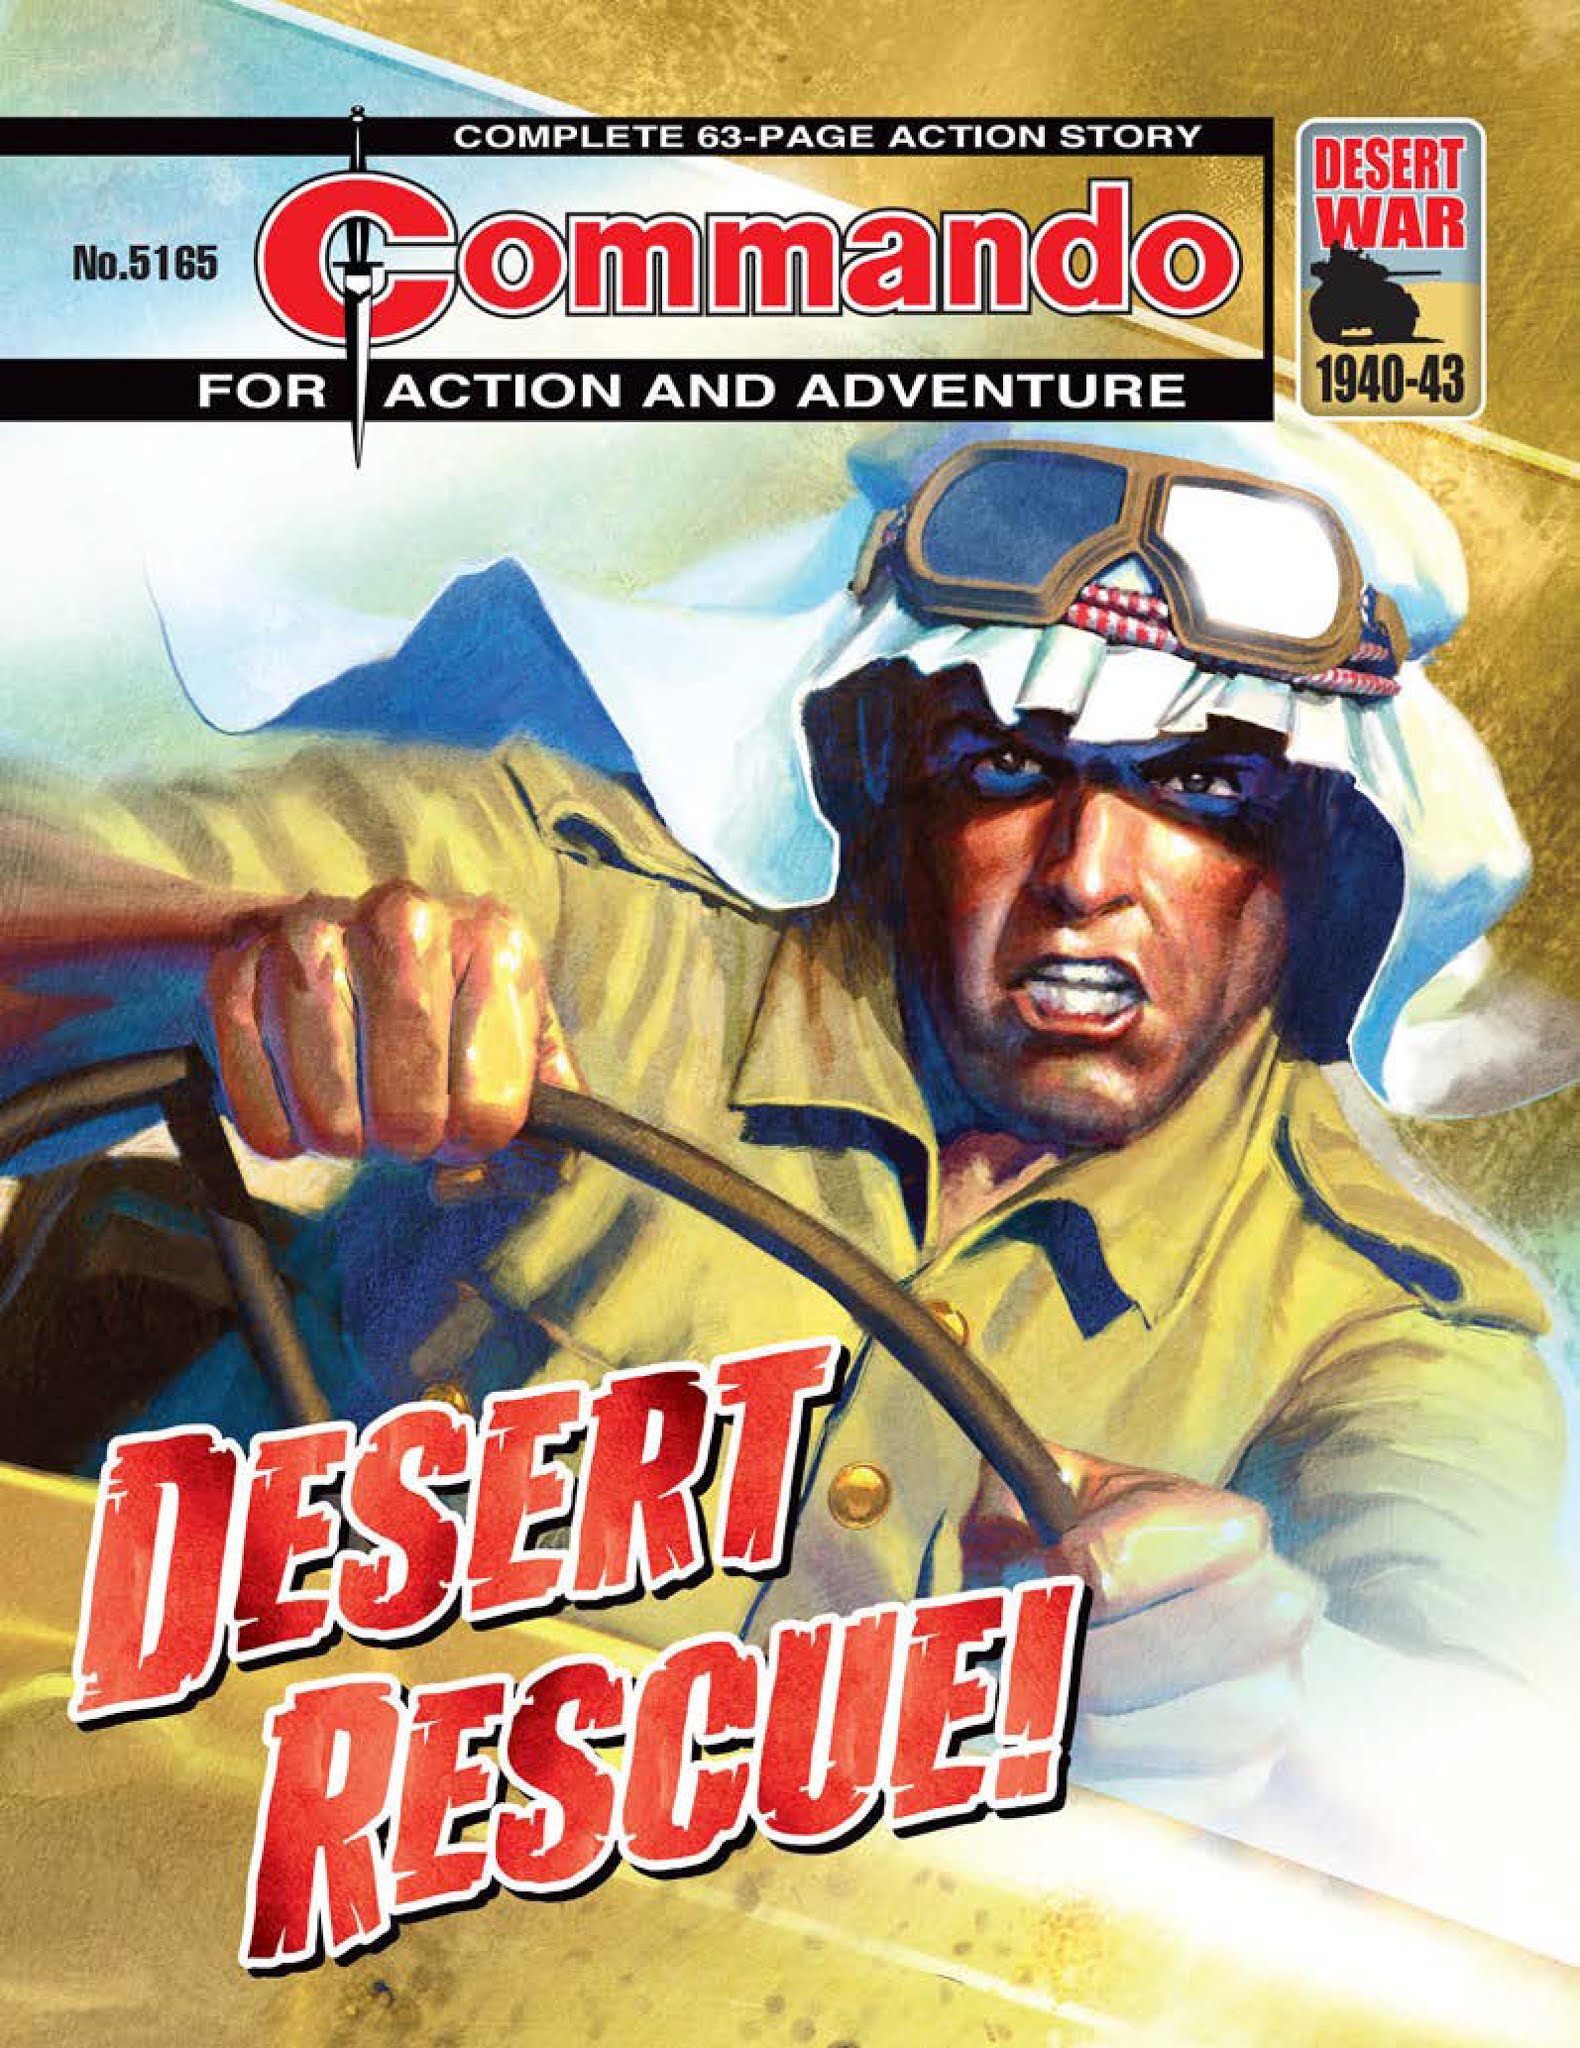 Read online Commando: For Action and Adventure comic -  Issue #5165 - 1